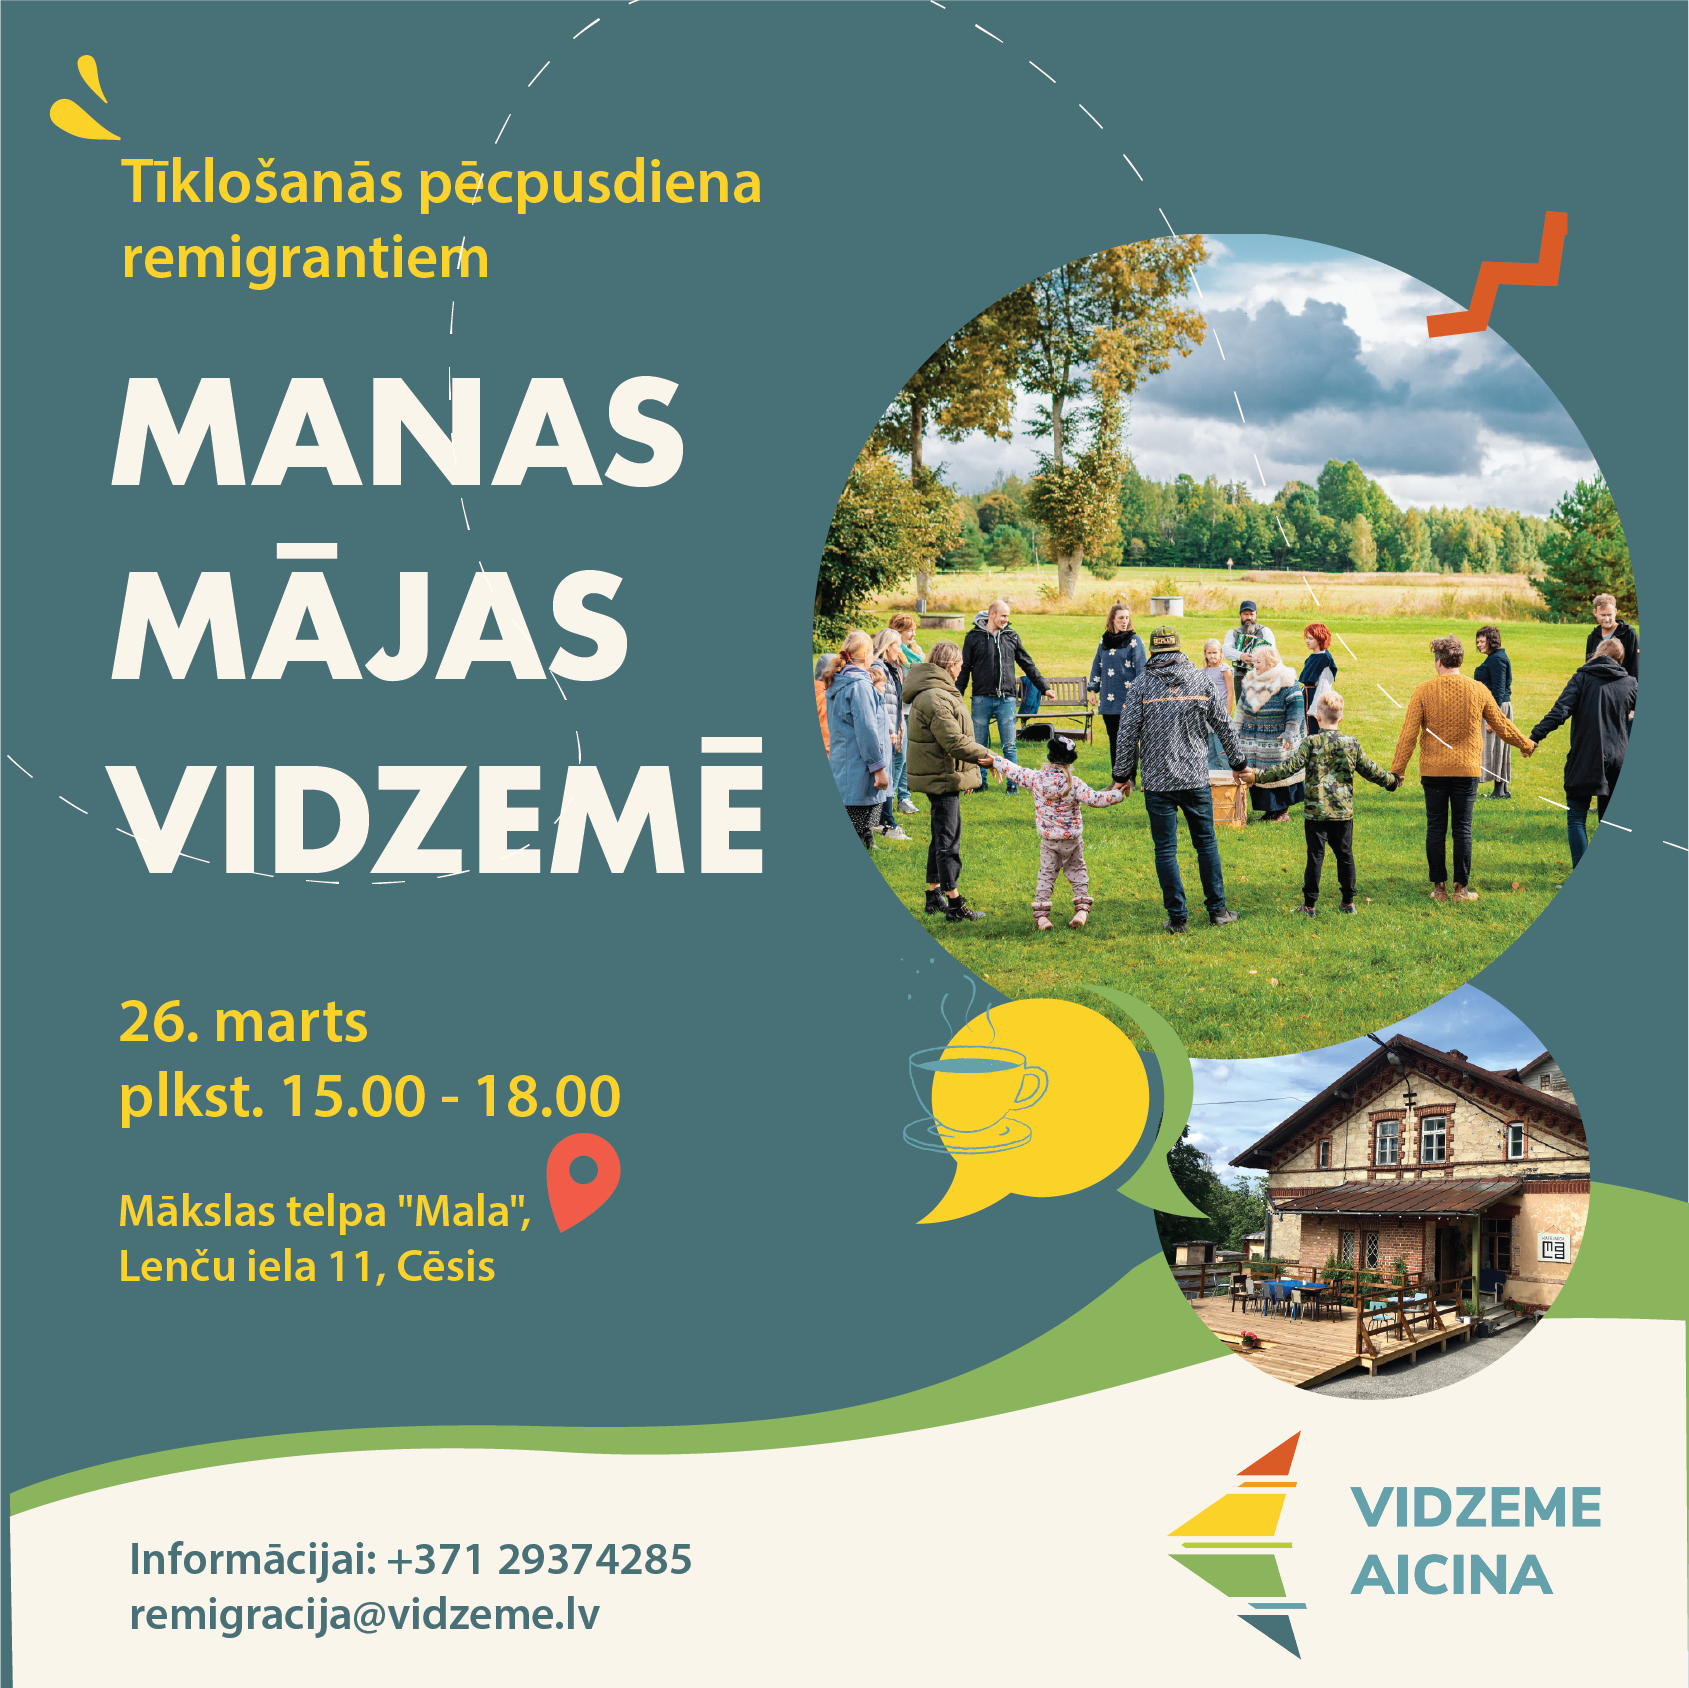 Remigrants kindly invited to the meeting in Cesis